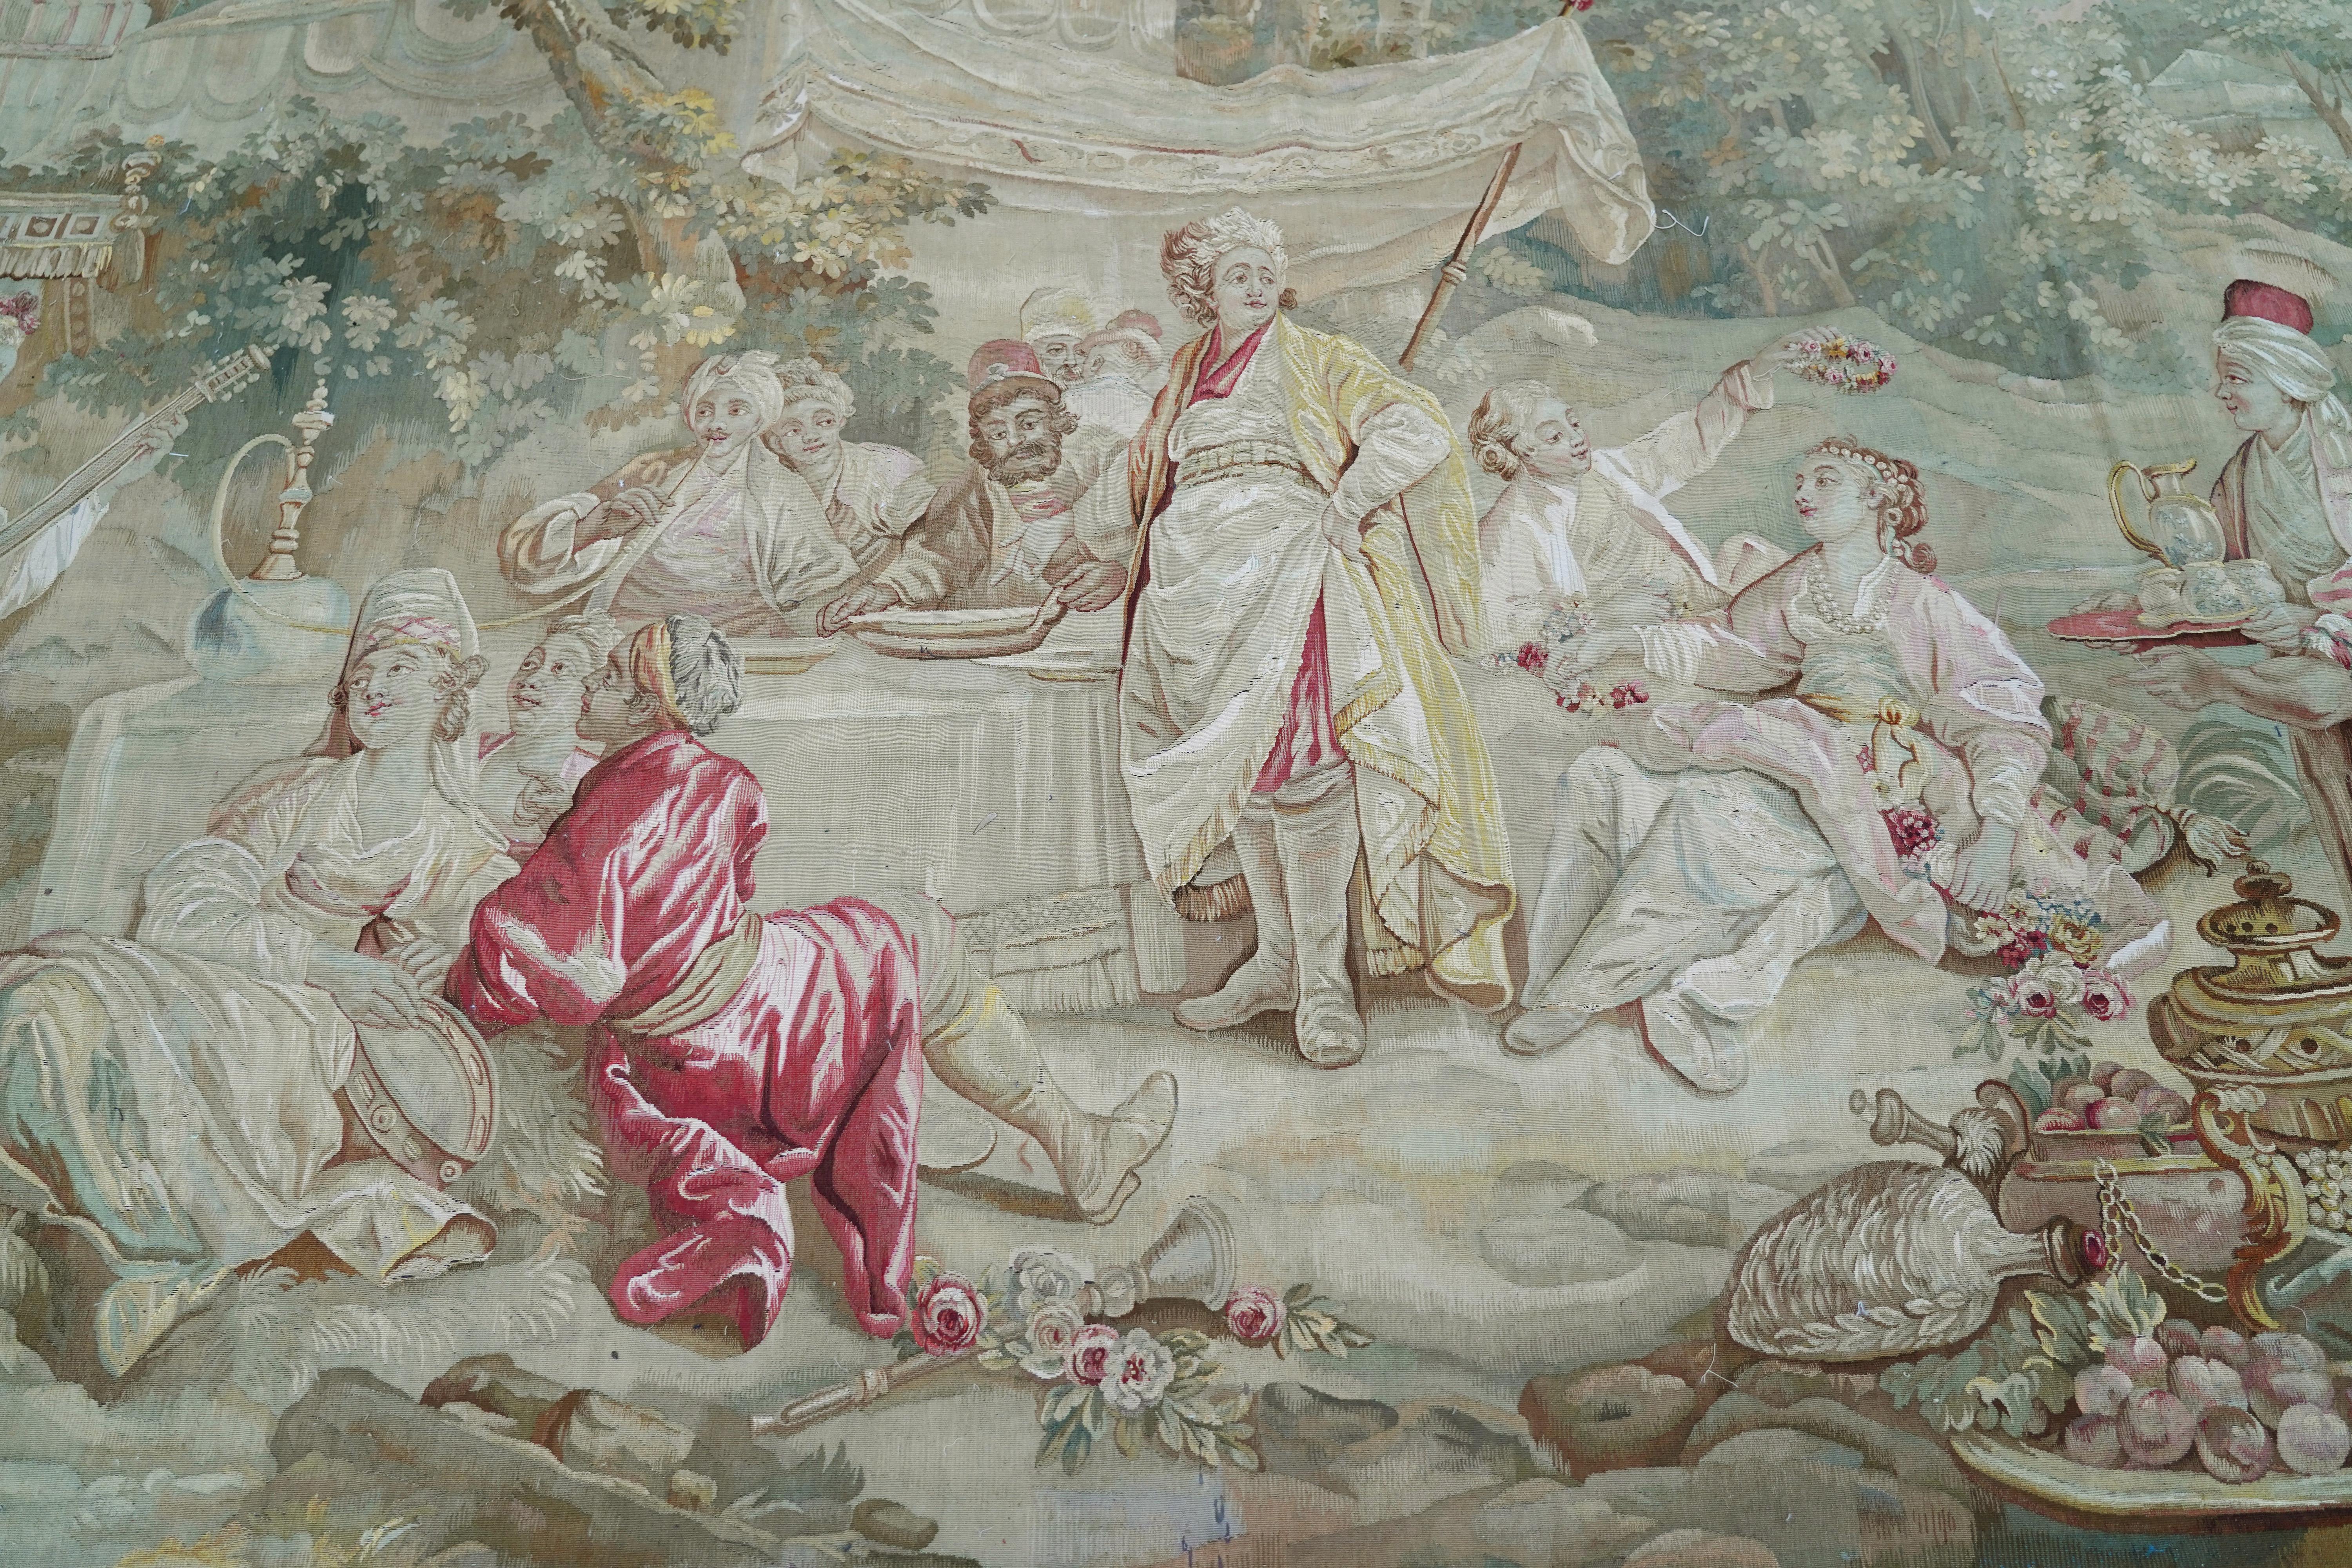 Aubusson Tapestry 